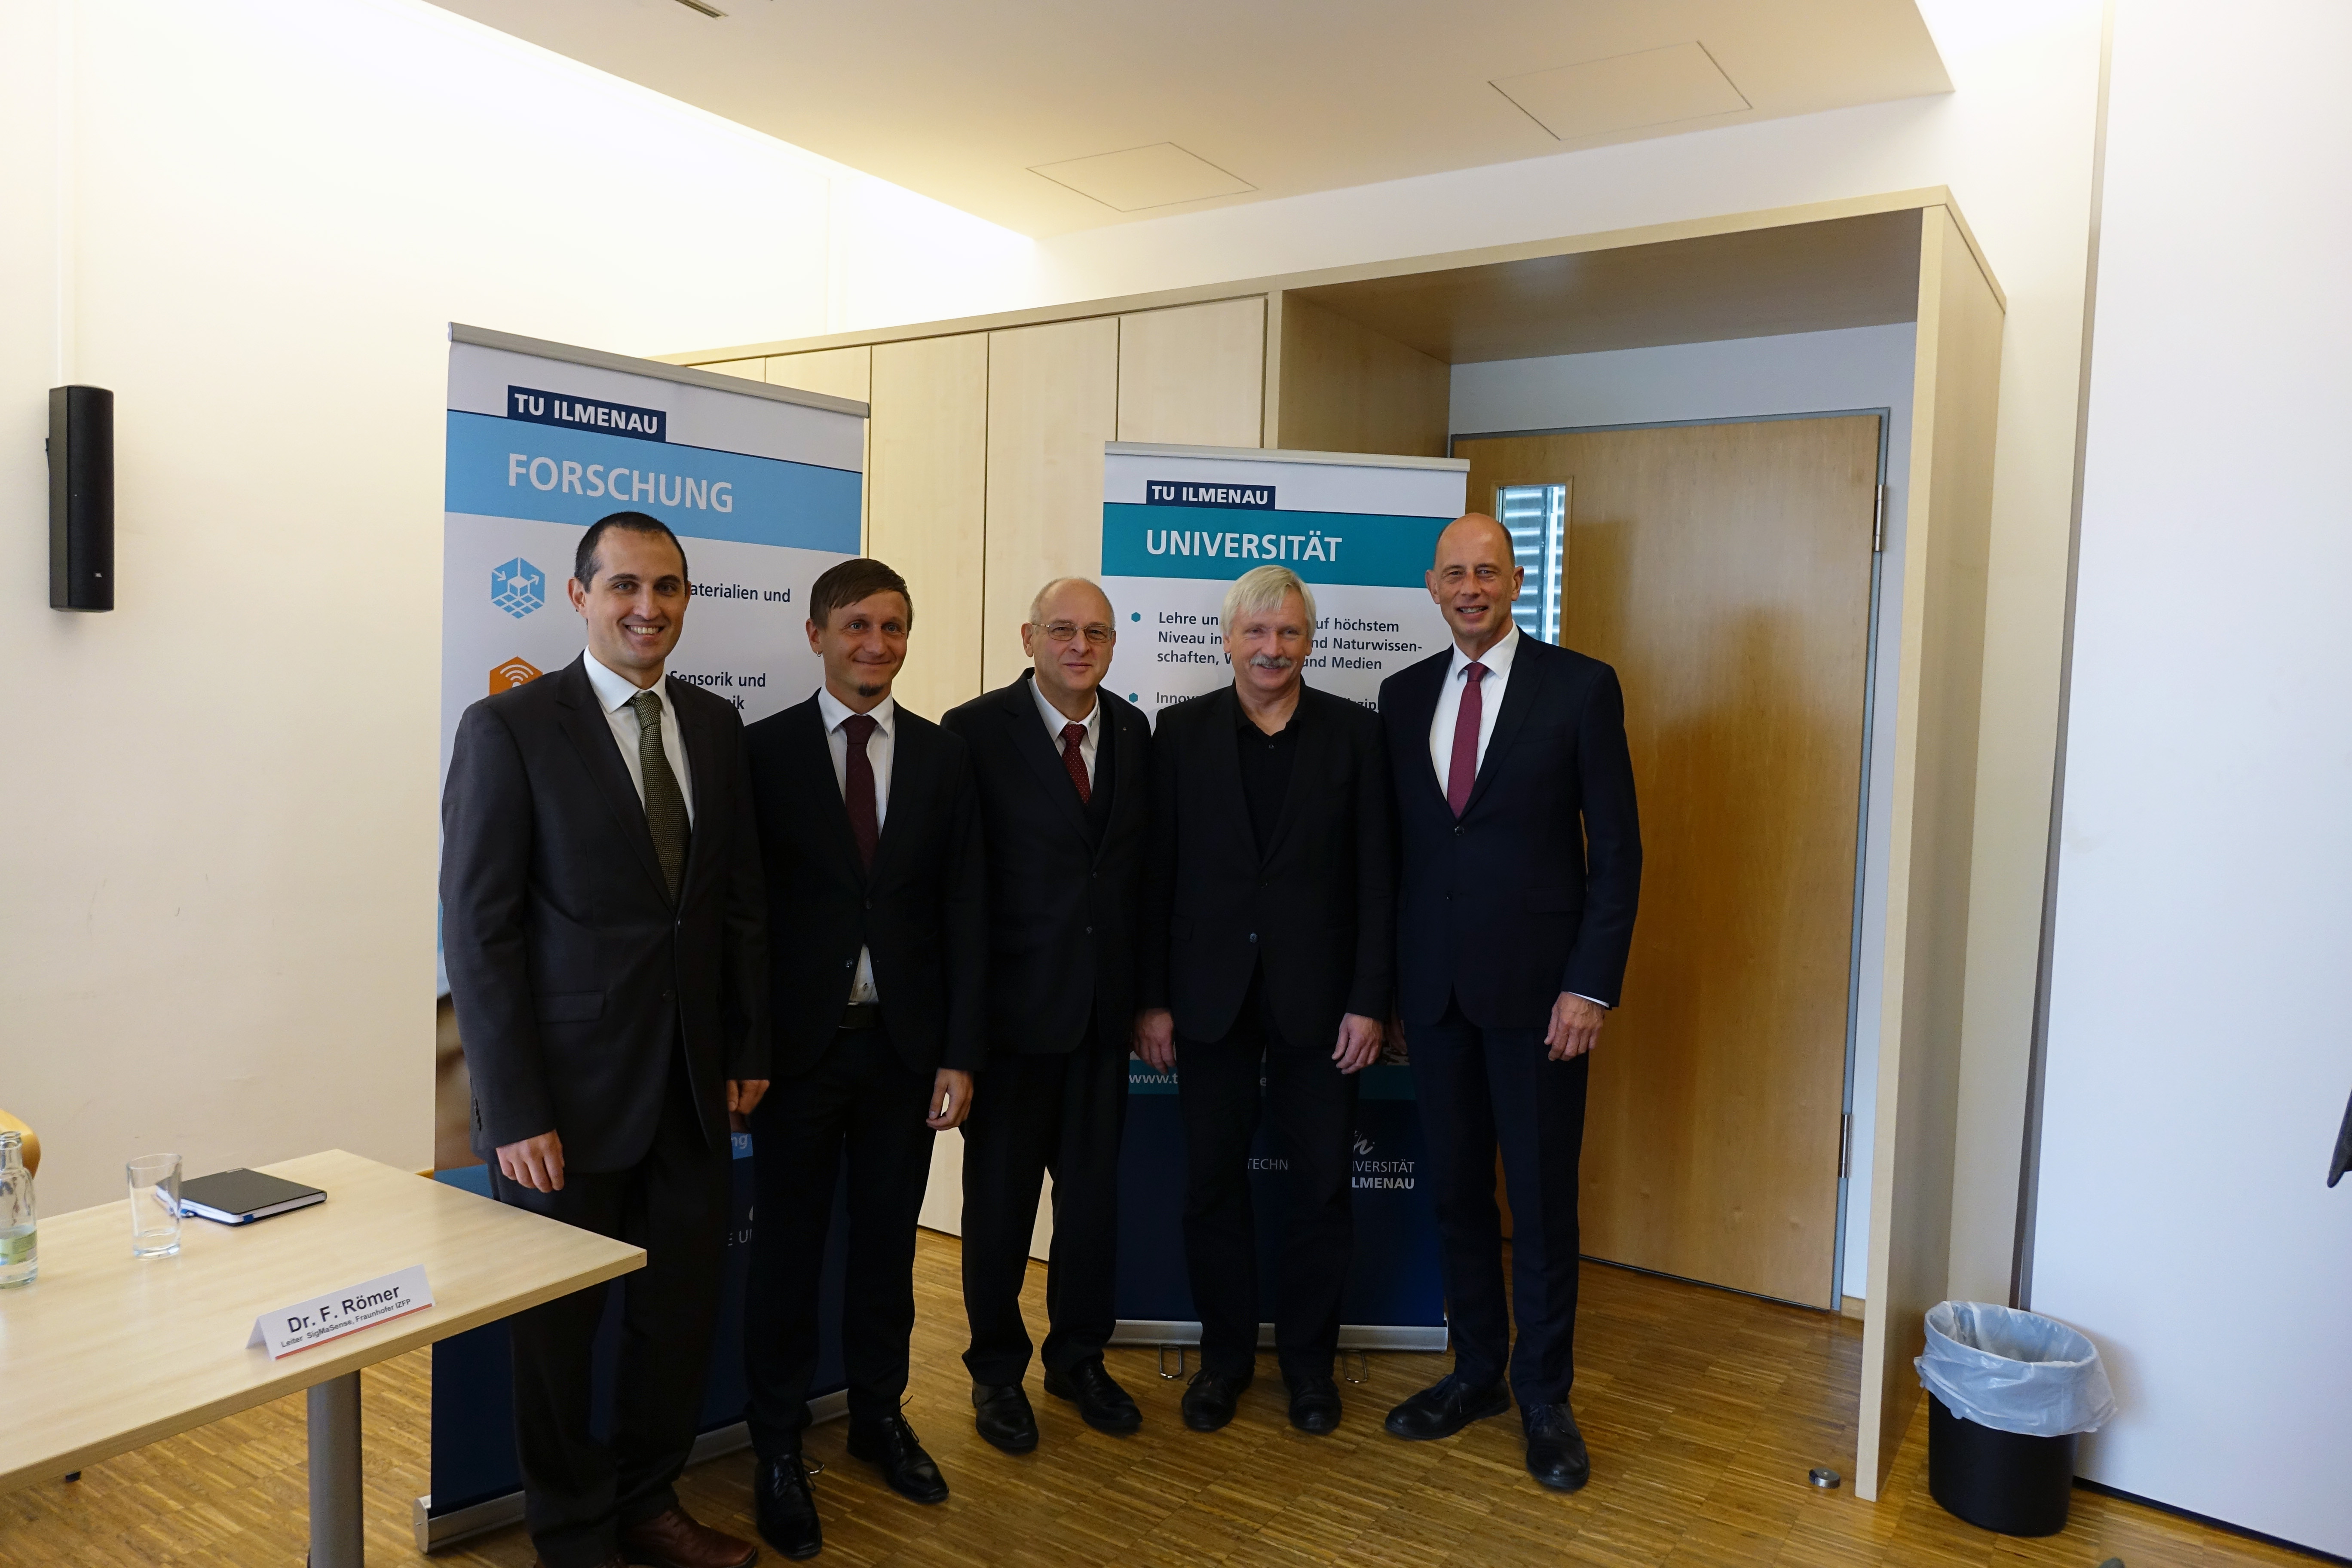 Giovanni Del Galdo and Florian Römer from ”SigMaSense”, Randolf Hanke (Fraunhofer IZFP), Rector Peter Scharff and Minister Wolfgang Tiefensee (from left) present the new perspectives for Ilmenau.